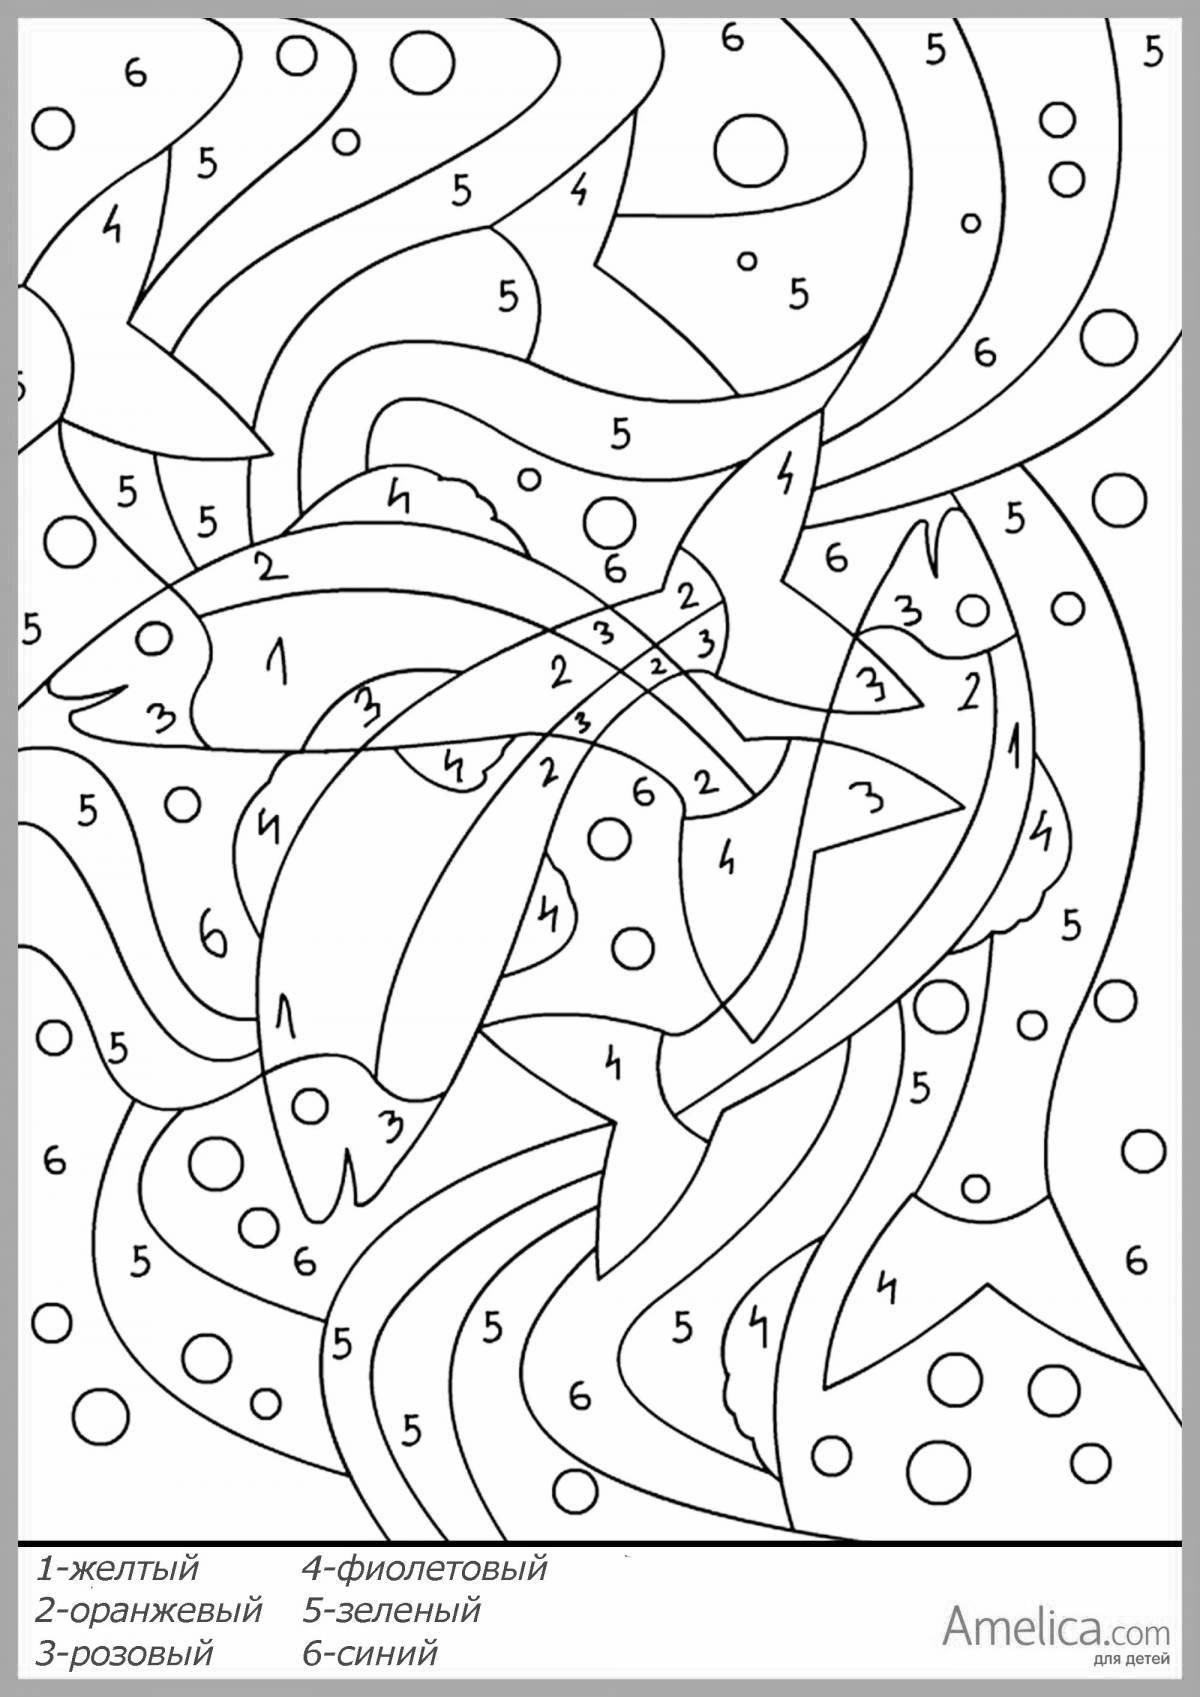 Fun coloring for children by numbers 6 7